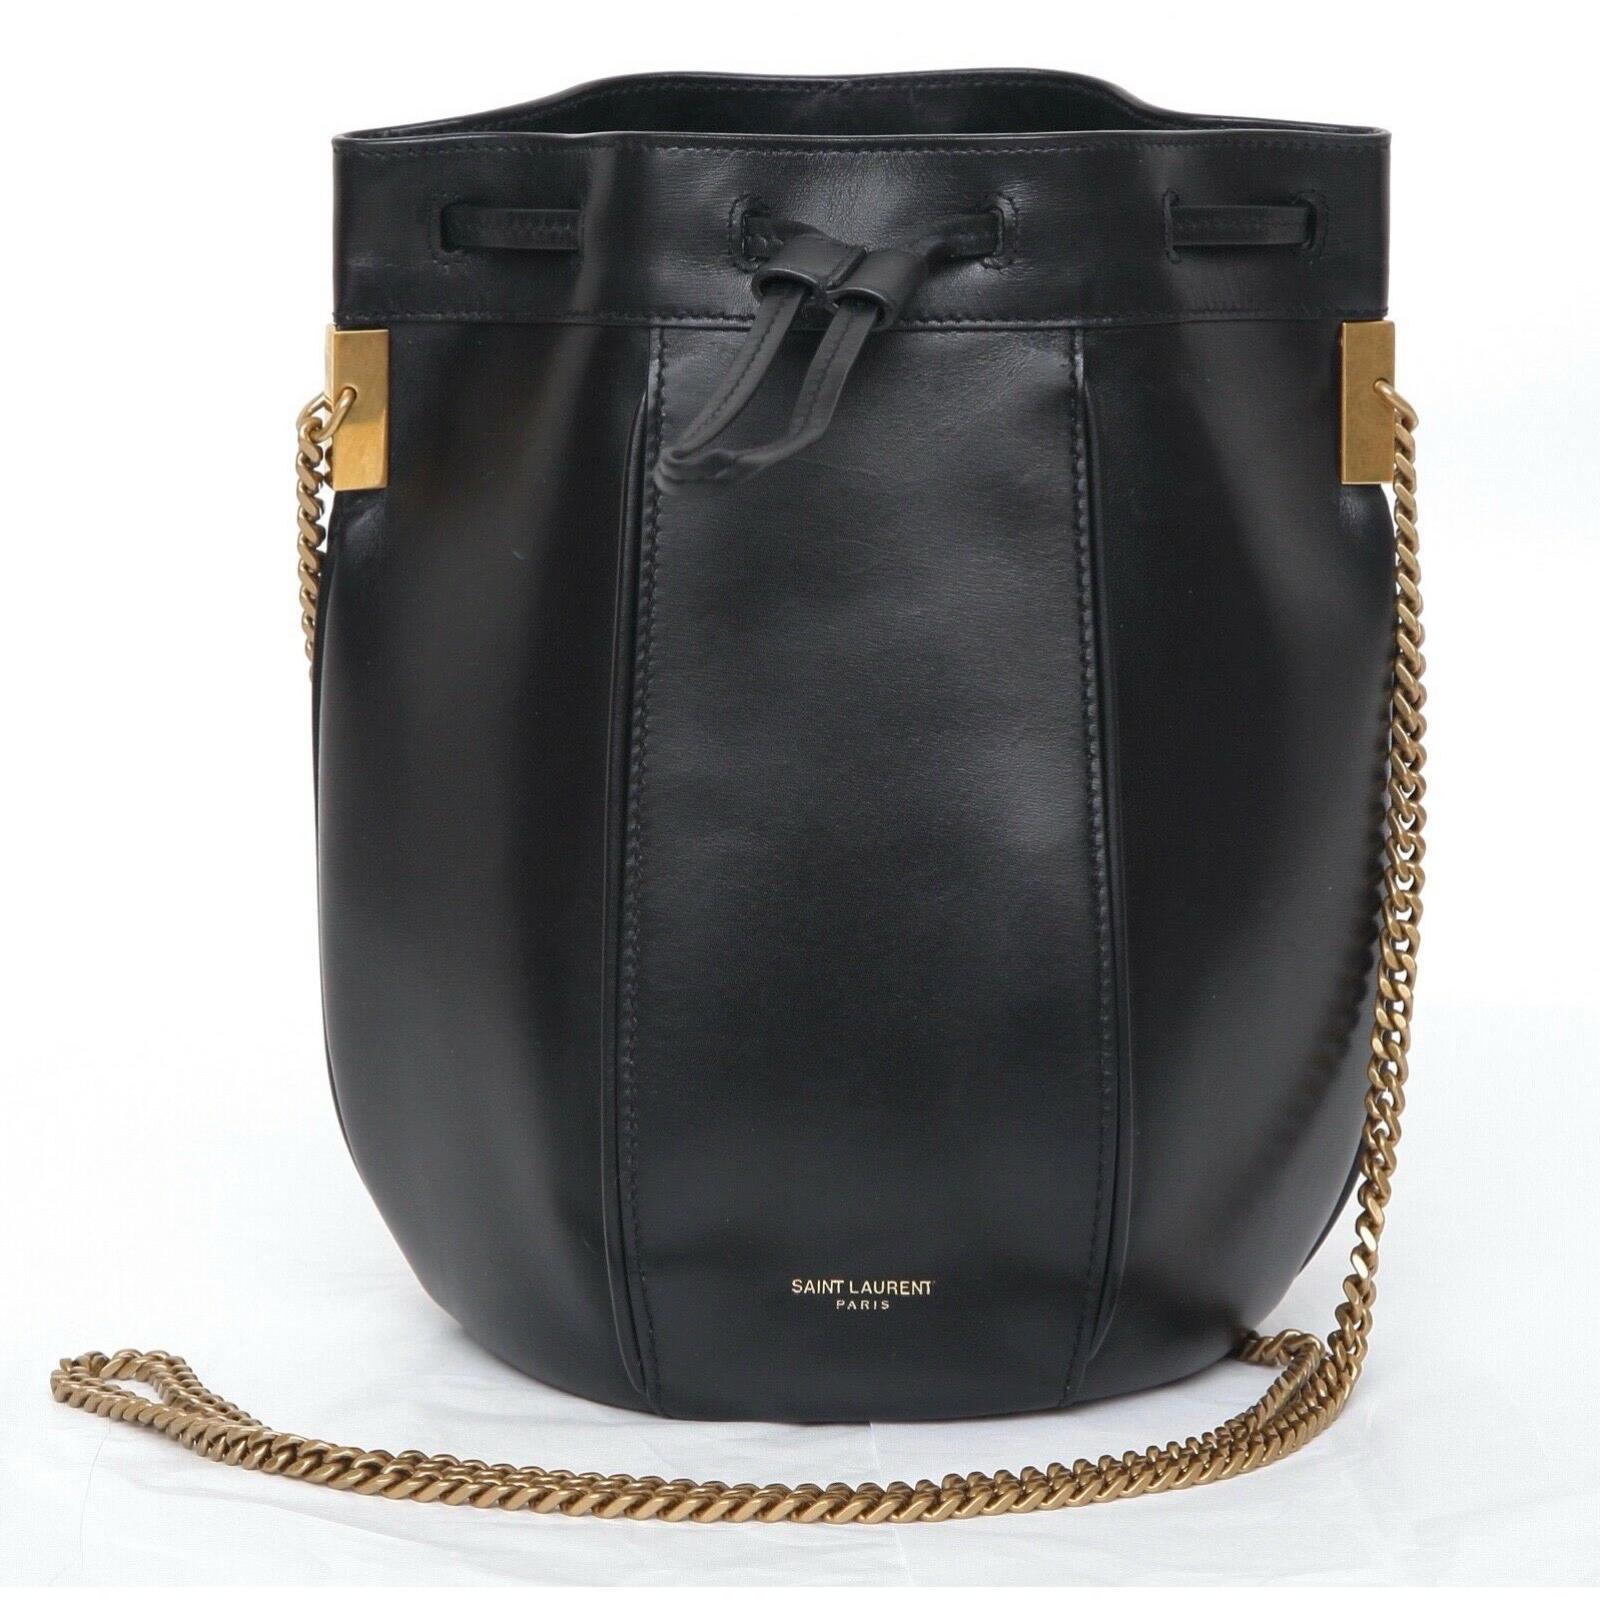 GUARANTEED AUTHENTIC SAINT LAURENT SMALL TALITHA BUCKET BAG

Retails excluding sales tax $1,950

Design: 
- Black leather exterior.
- Panels.
- Front drawstring closure.
- Signature embossed at bottom front.
- Interior has one main compartment with